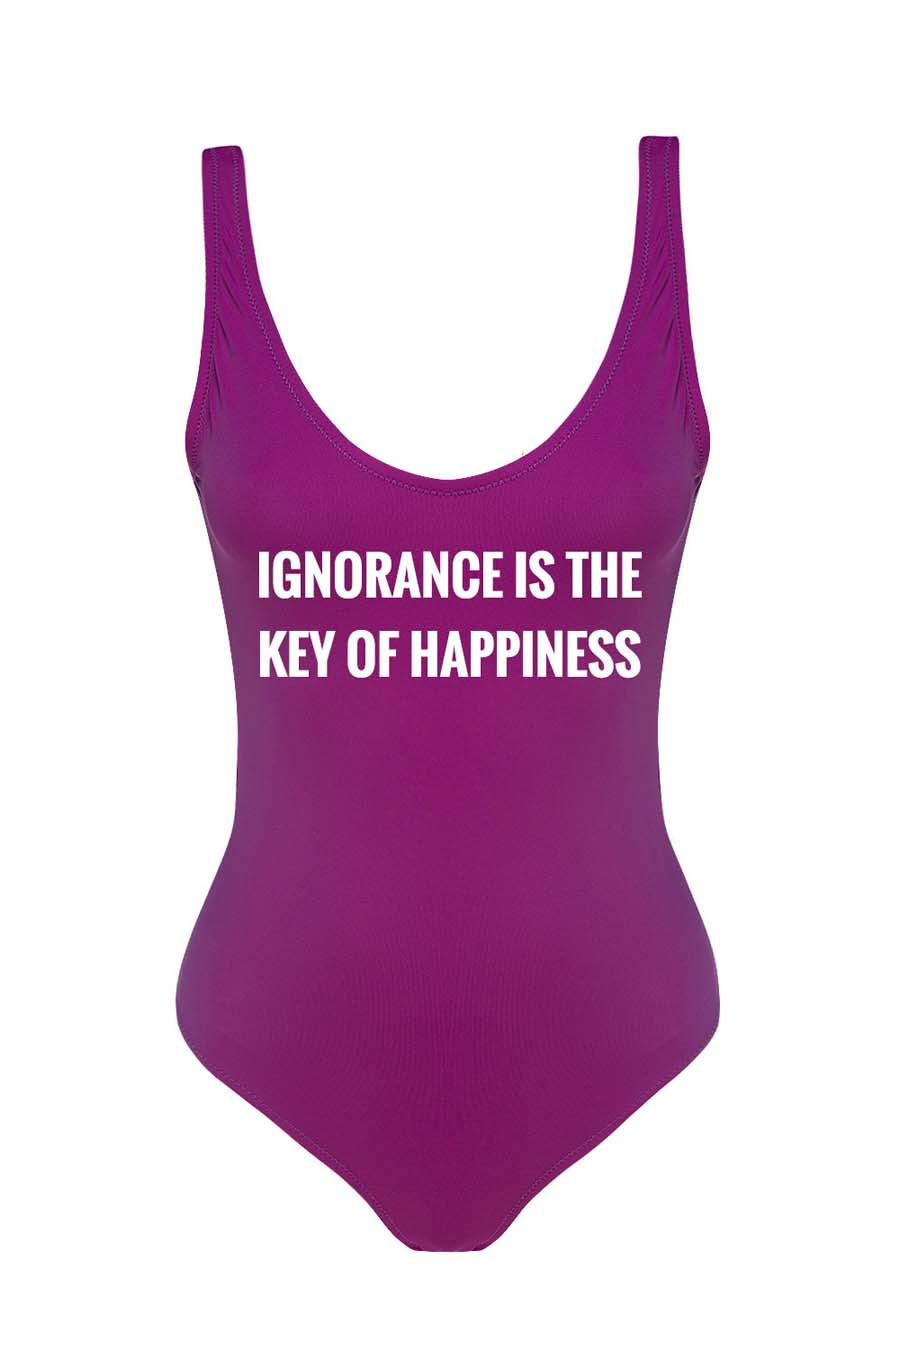 Ignorance is the key of happiness